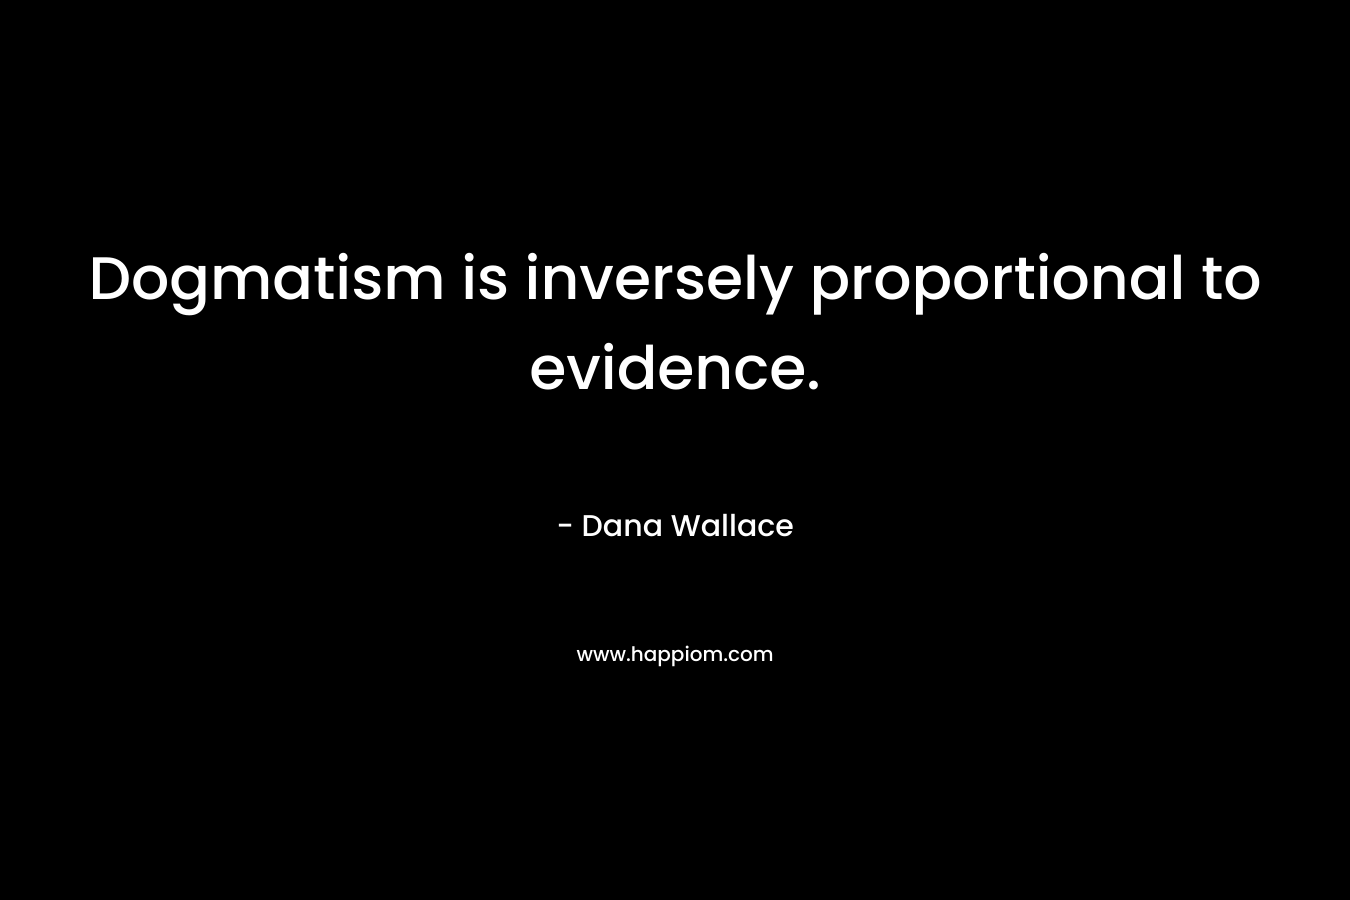 Dogmatism is inversely proportional to evidence. – Dana Wallace